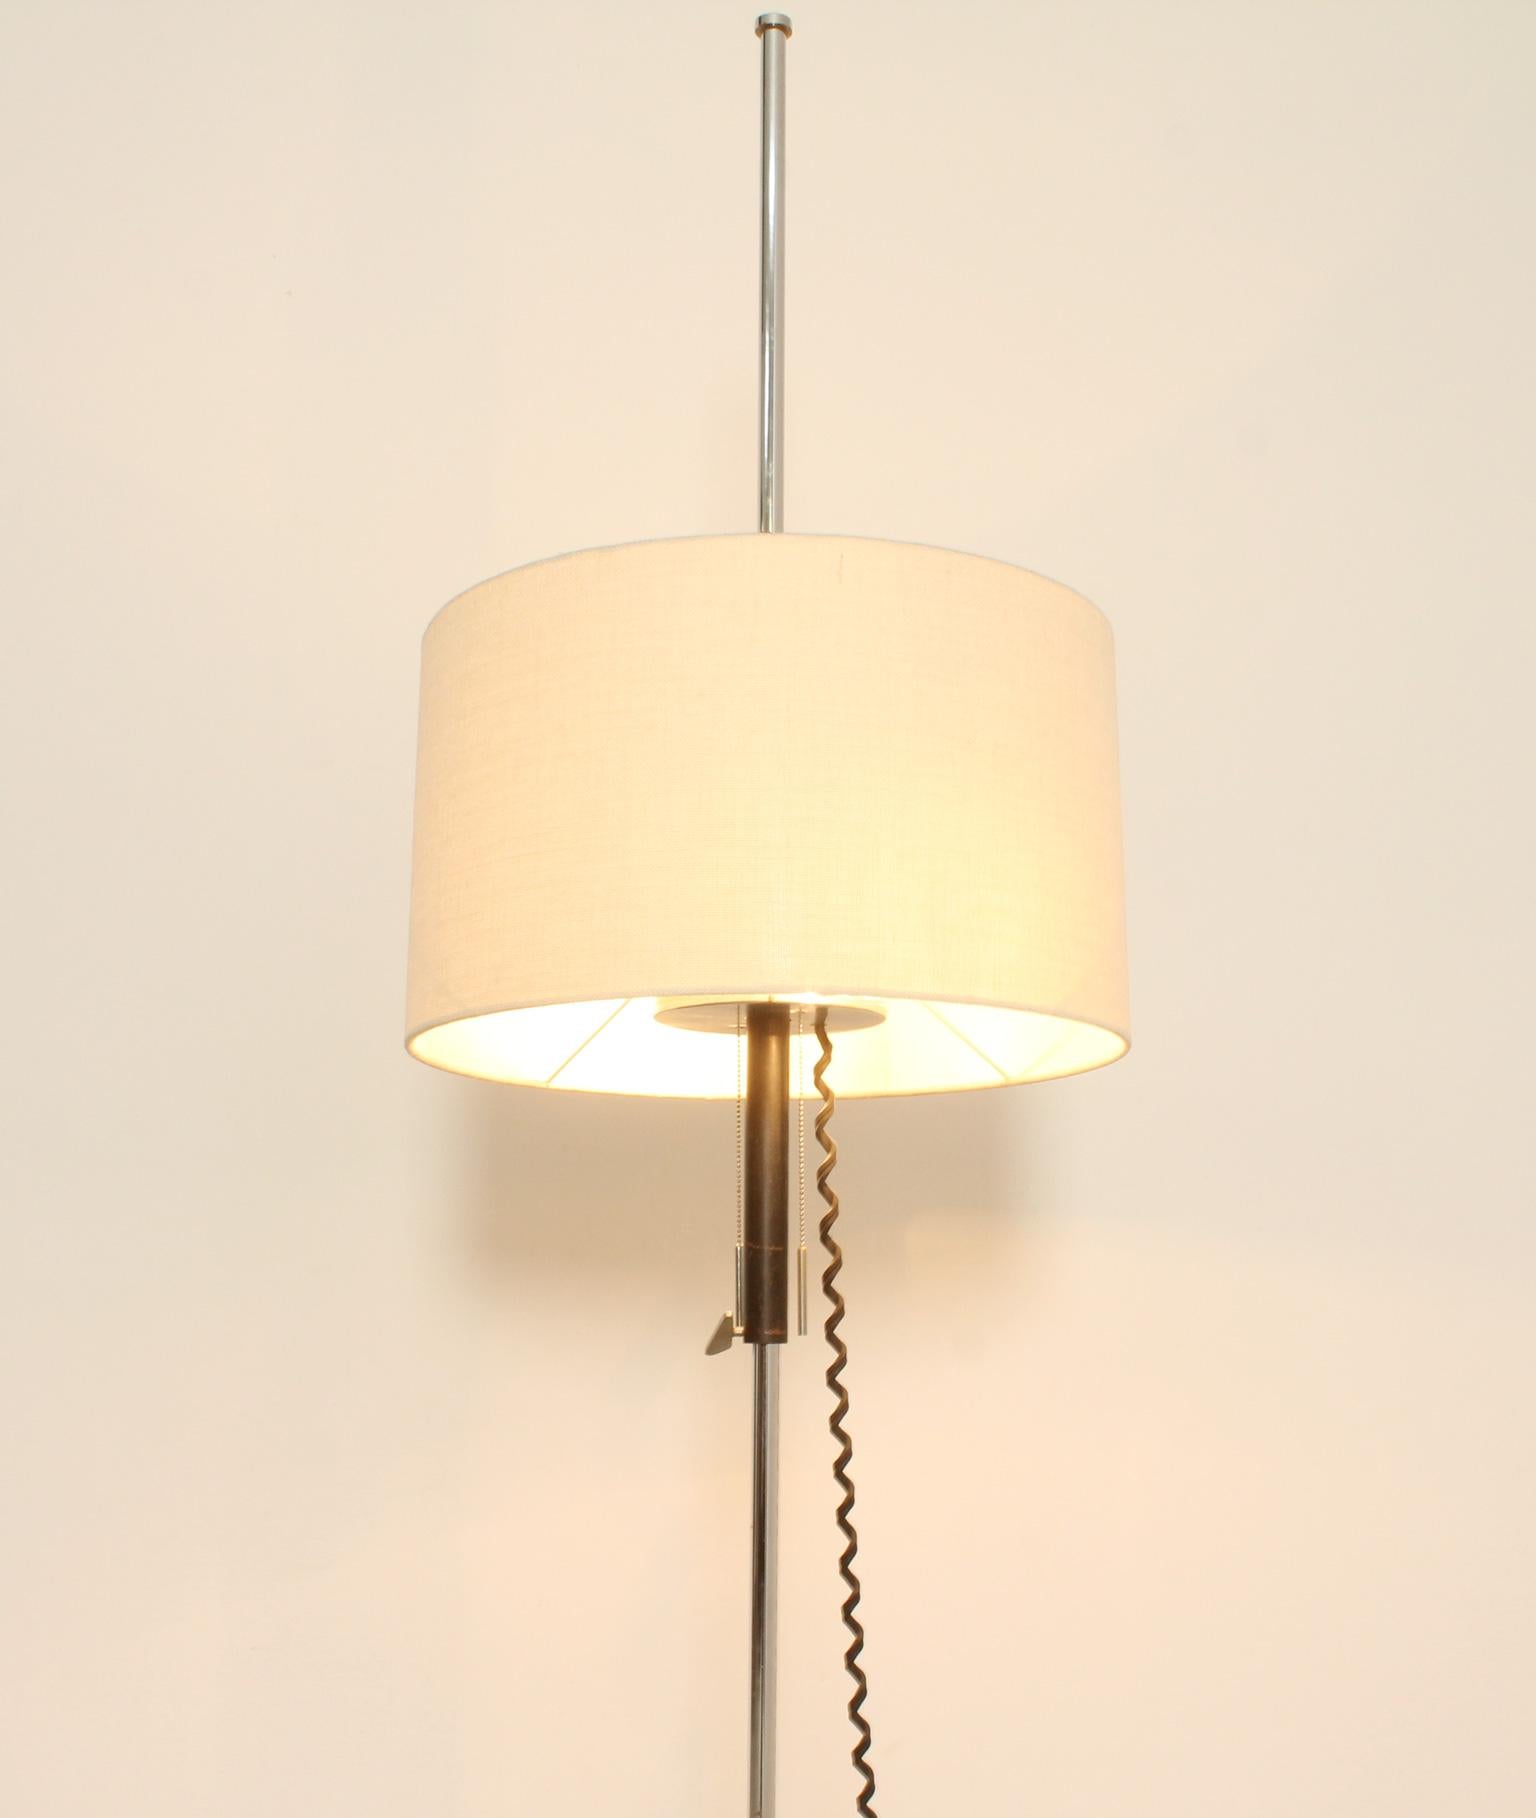 Floor Lamp with Adjustable Lampshade, Spain, 1960's For Sale 4